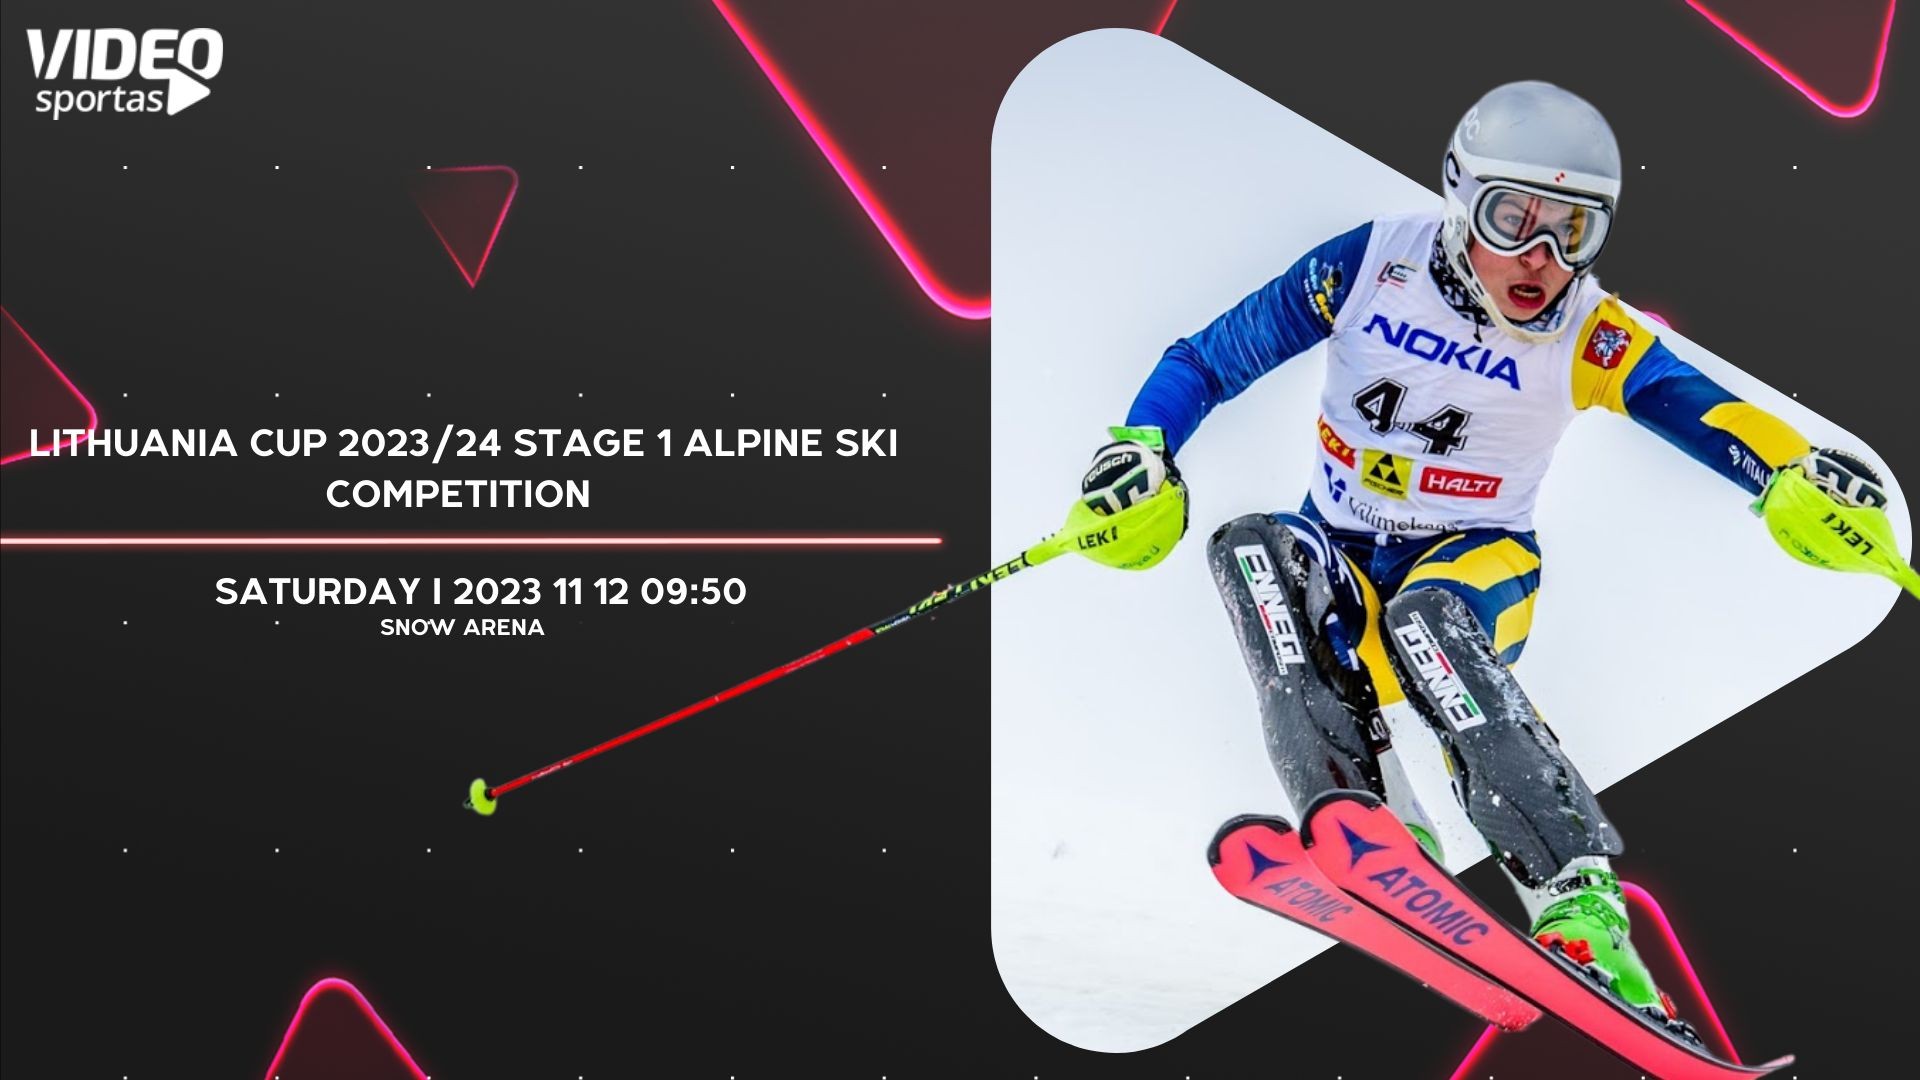 LITHUANIA CUP 2023/24 STAGE 1 ALPINE SKI COMPETITION